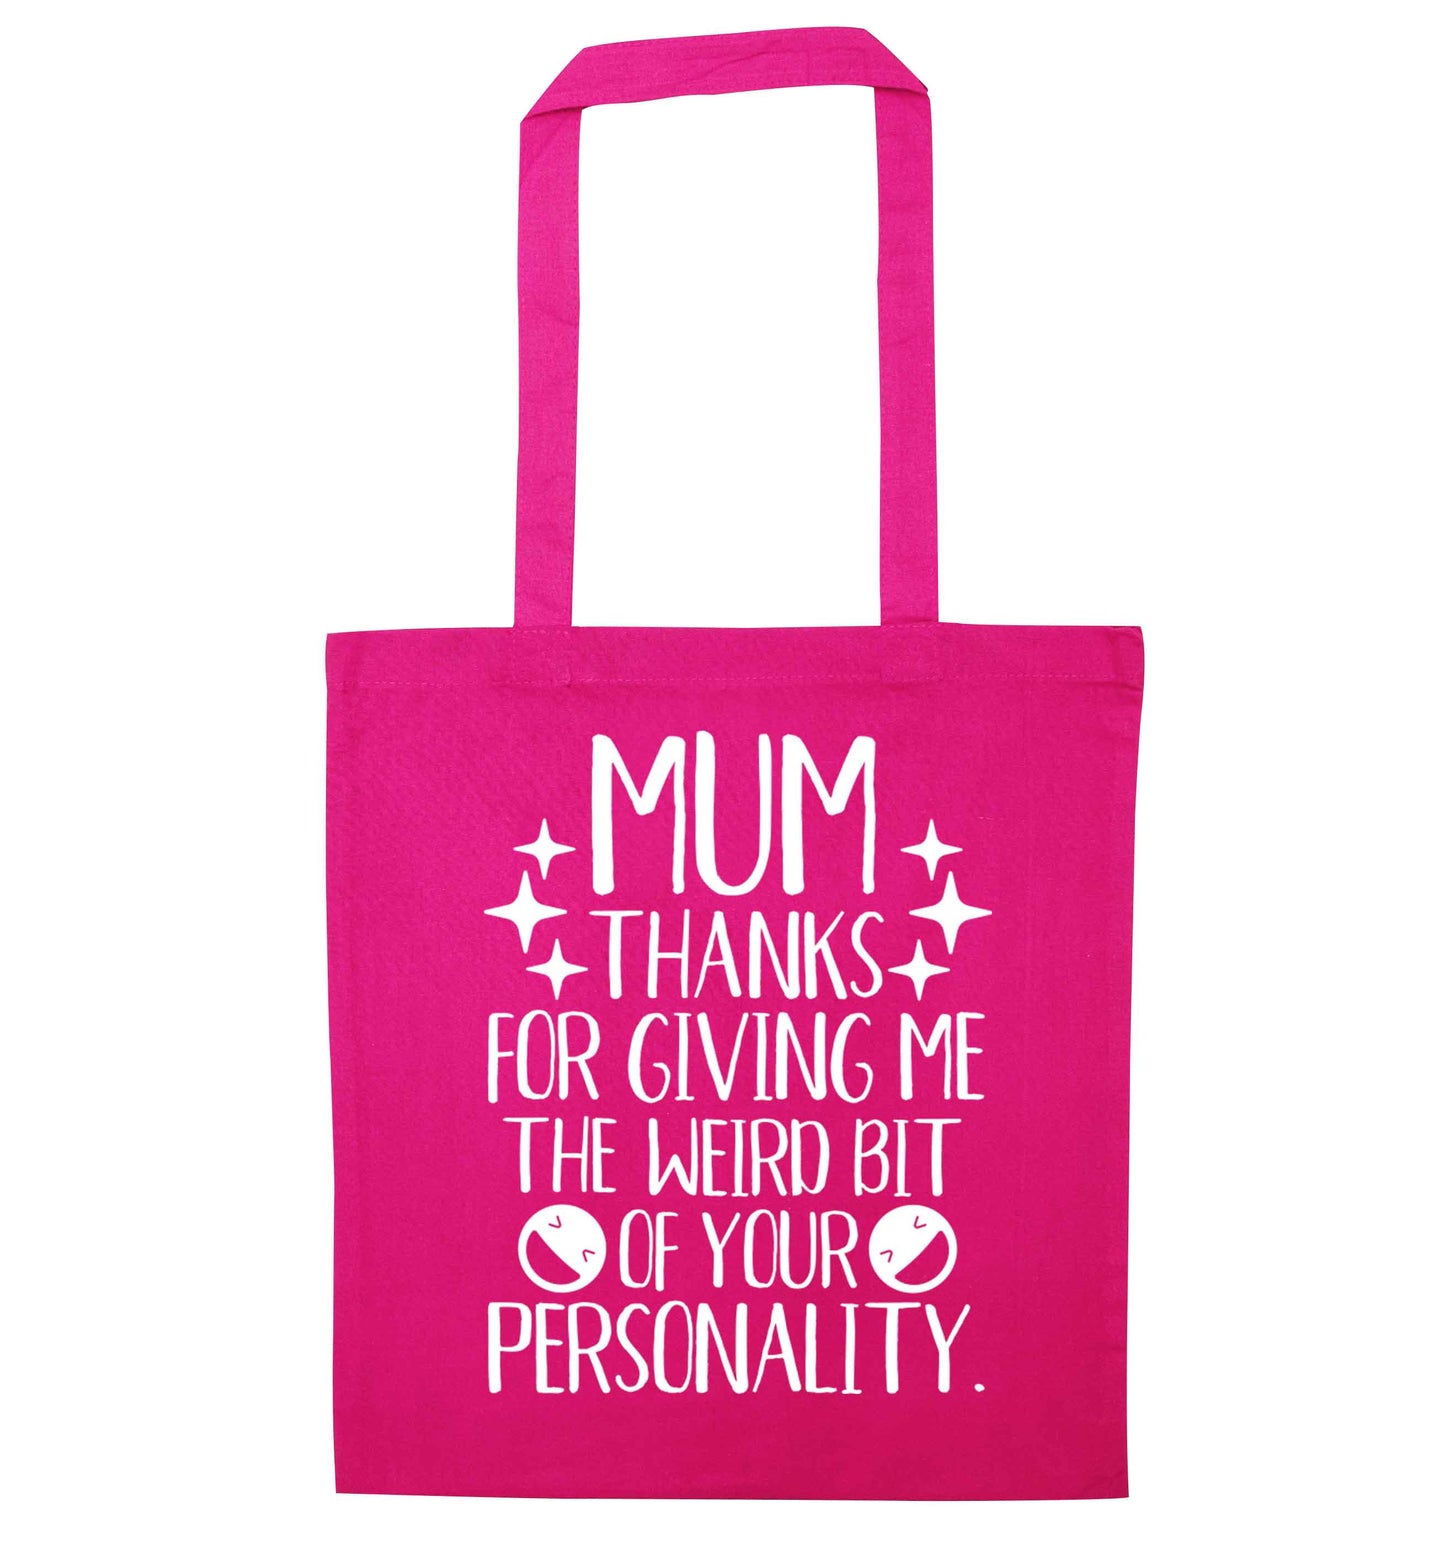 Mum thanks for giving me the weird bit of your personality pink tote bag